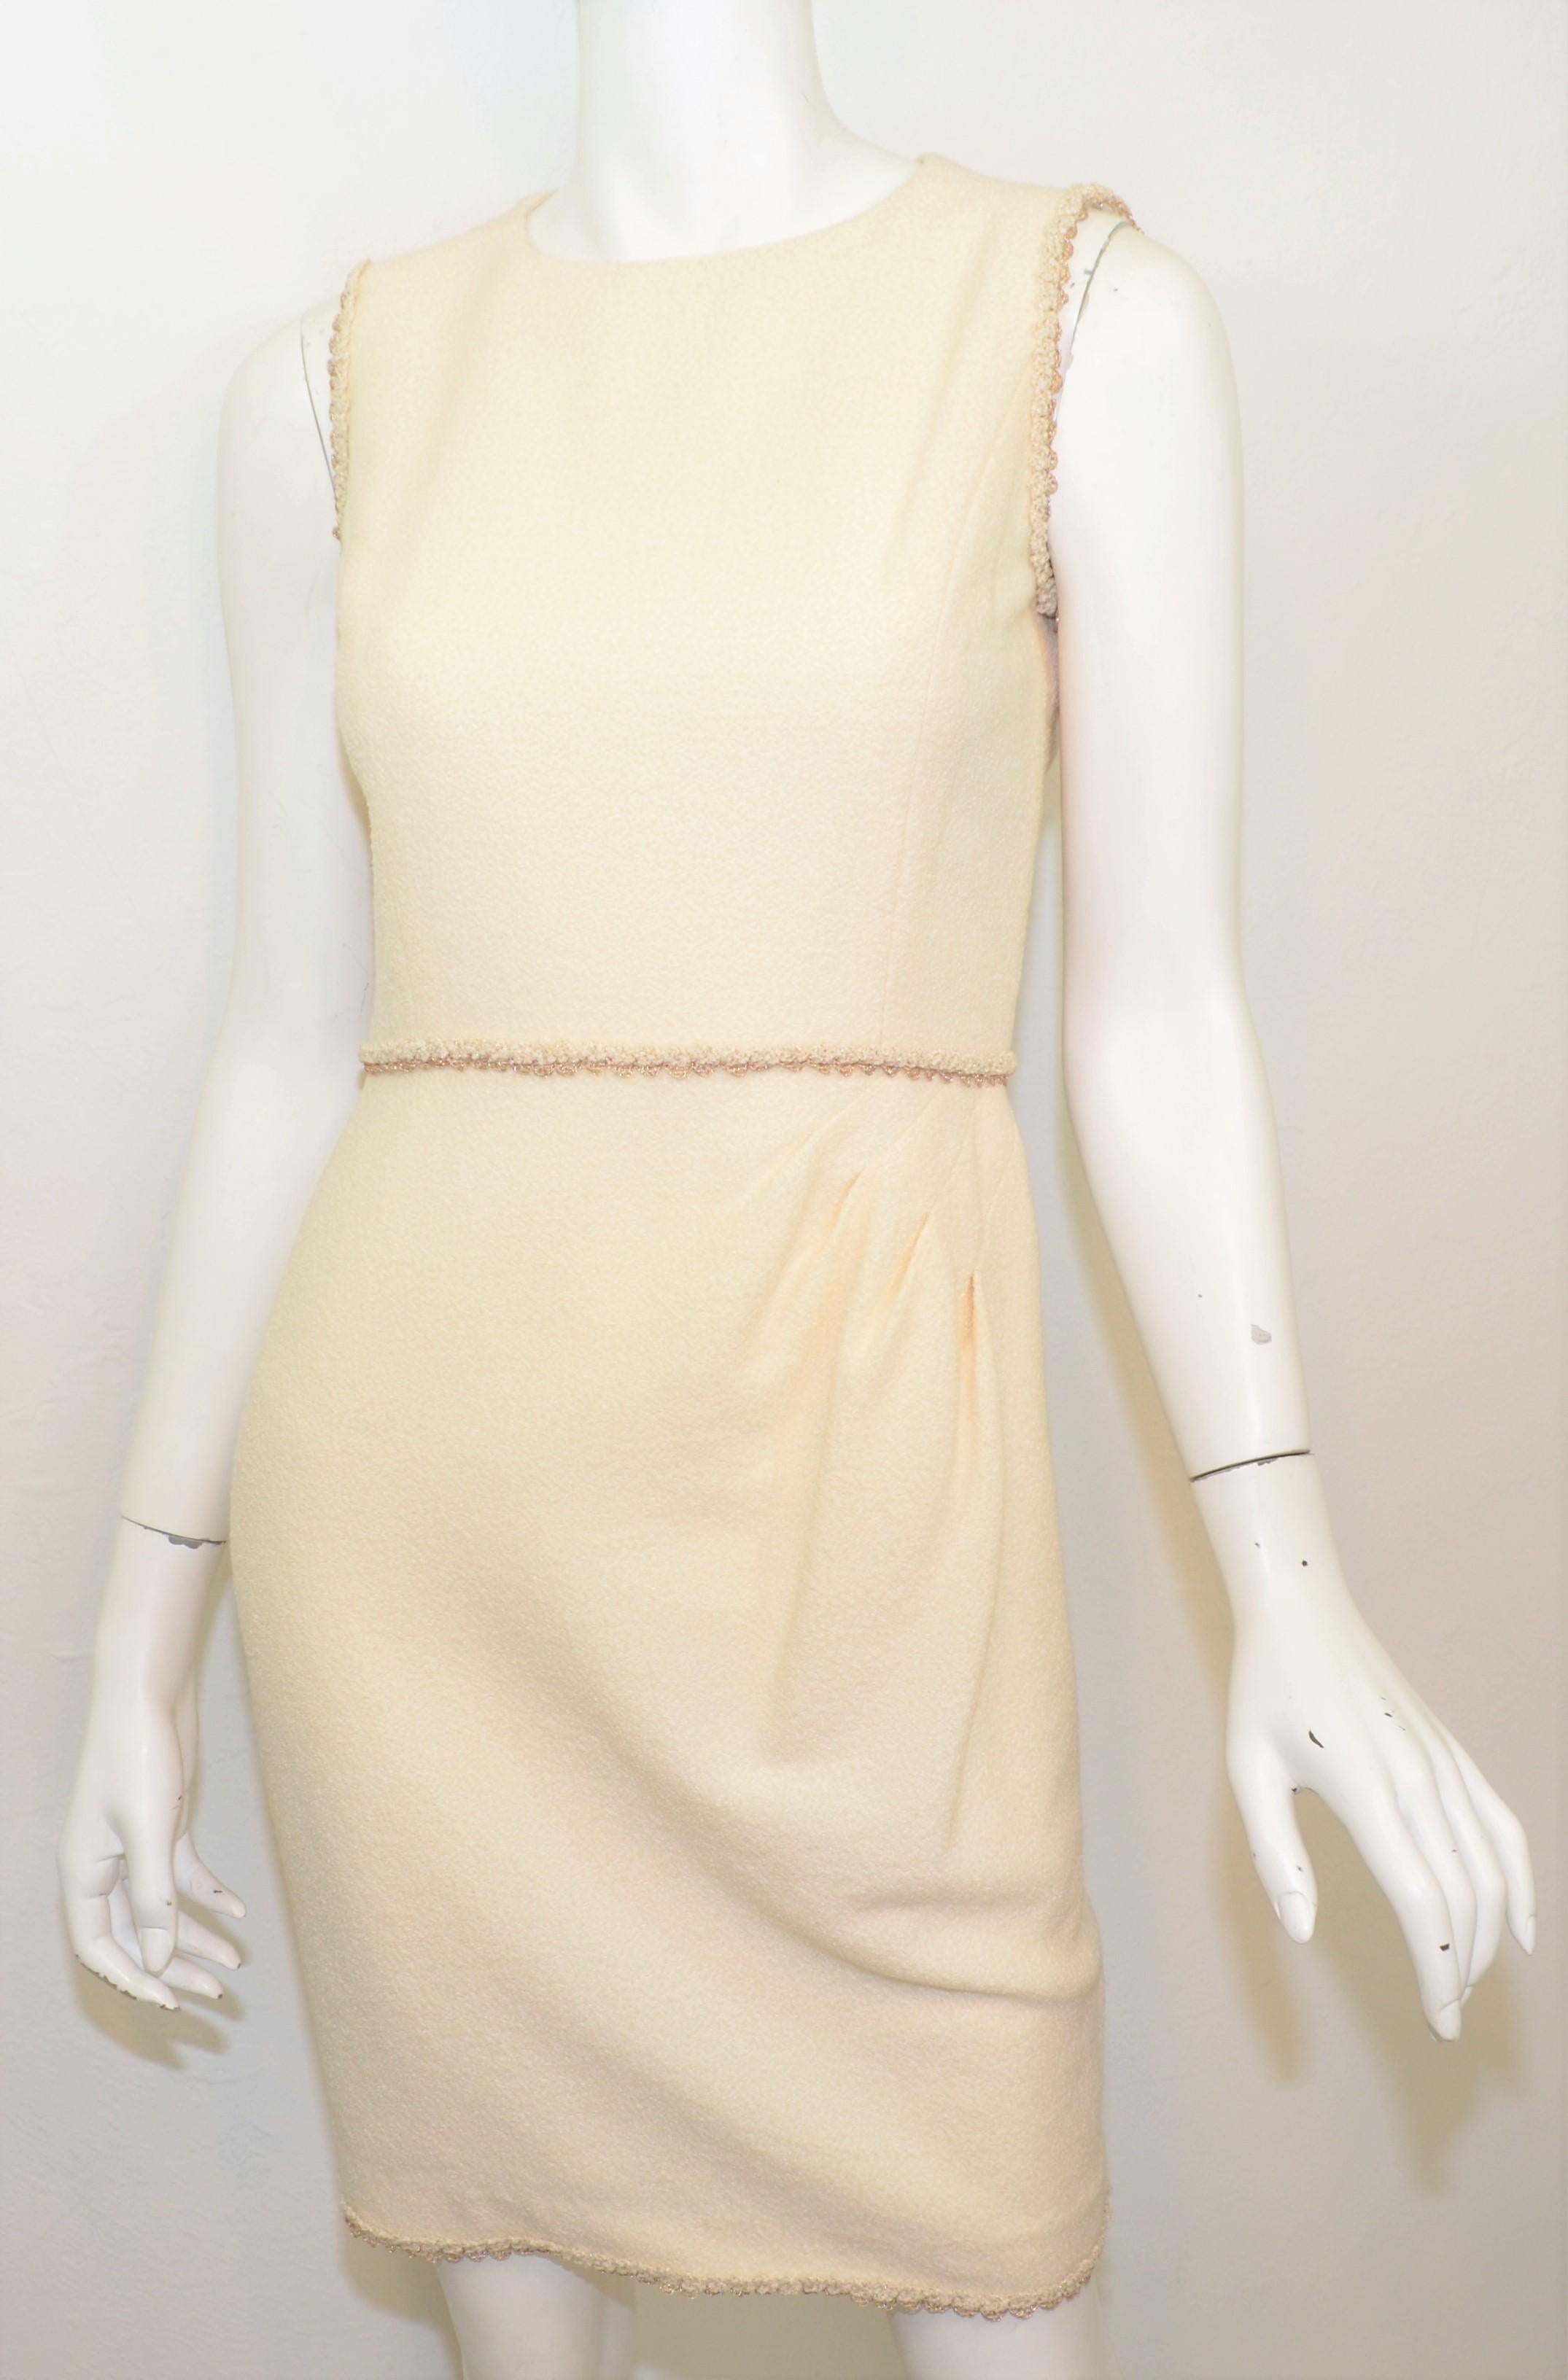 2010 Resort Collection Chanel Cream Knit Dress NWT -- Dress is featured in a cream/ivory color composed with a wool blend knit fabric with bronze threading along the waistline, hem, and trims of the sleeves. Subtle ruching on the left side of the